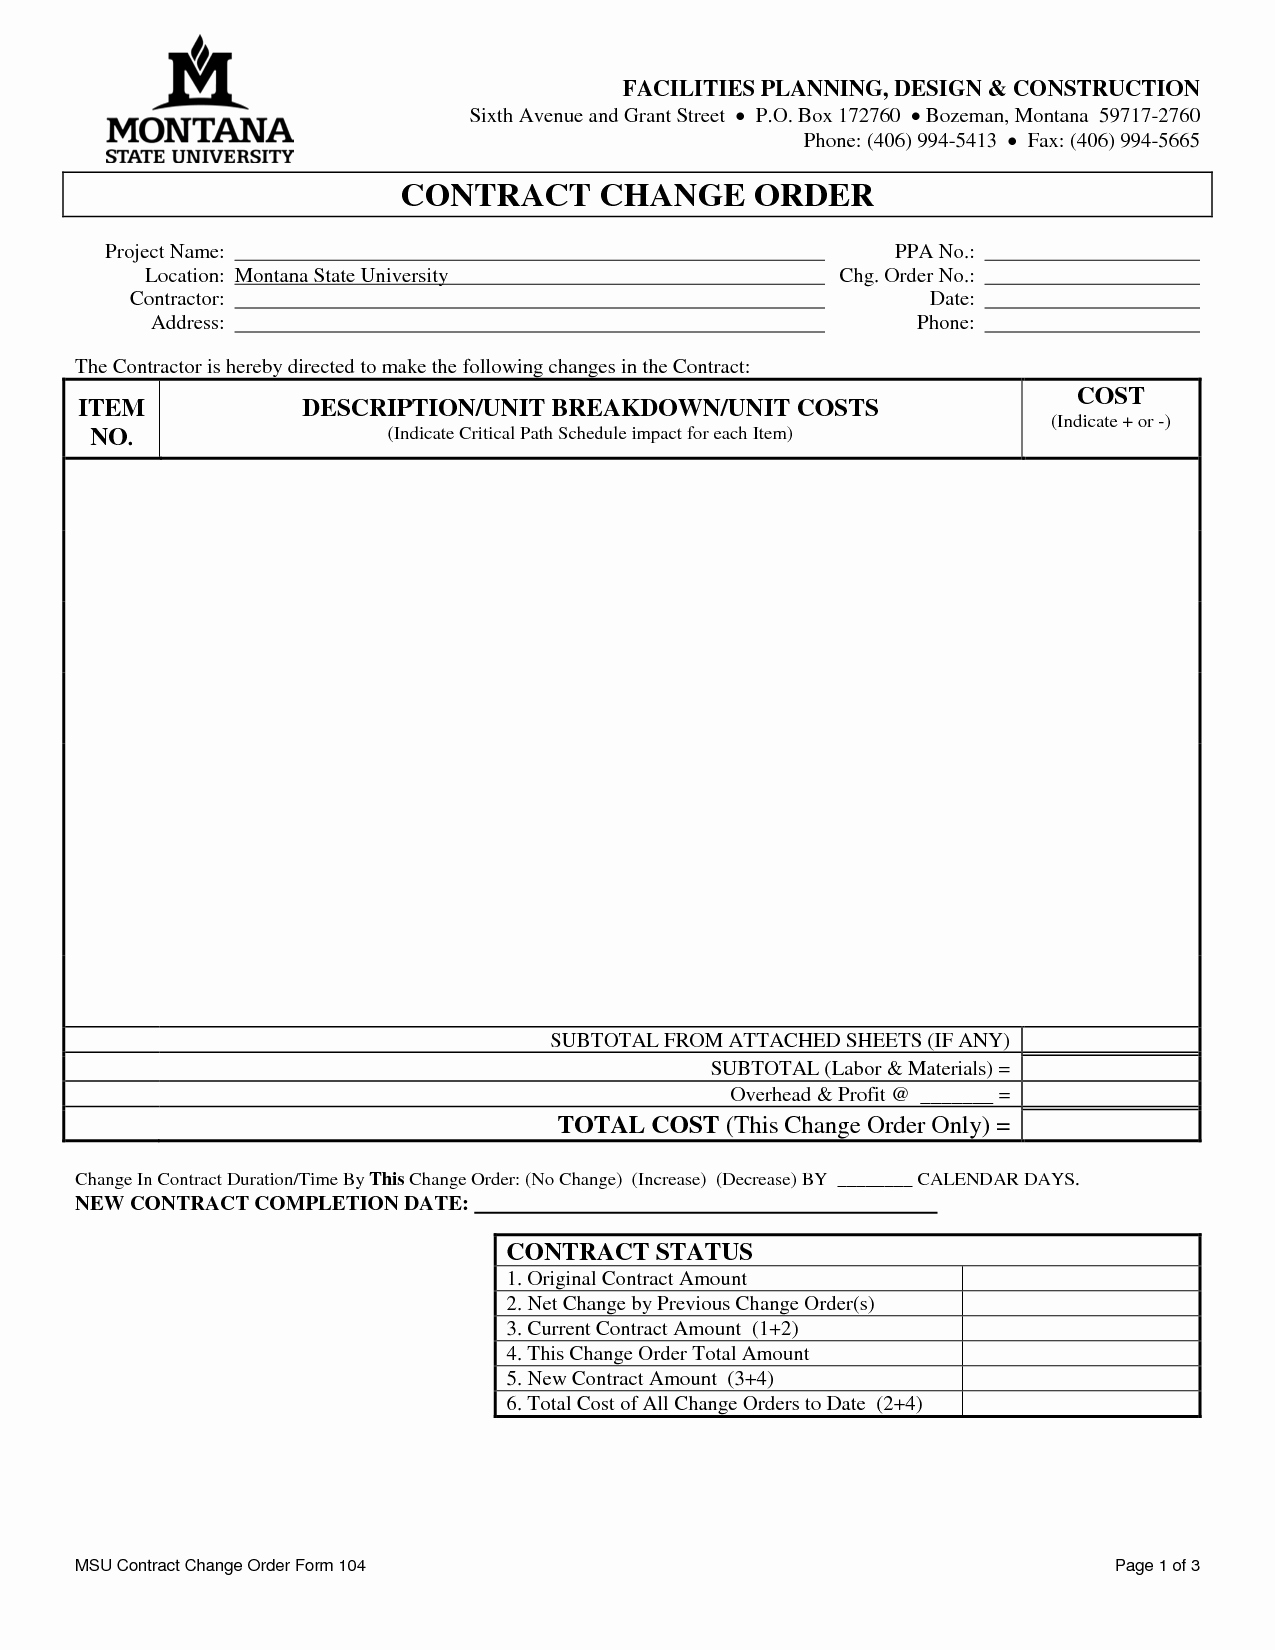 Construction Work order Template Luxury Change order Template